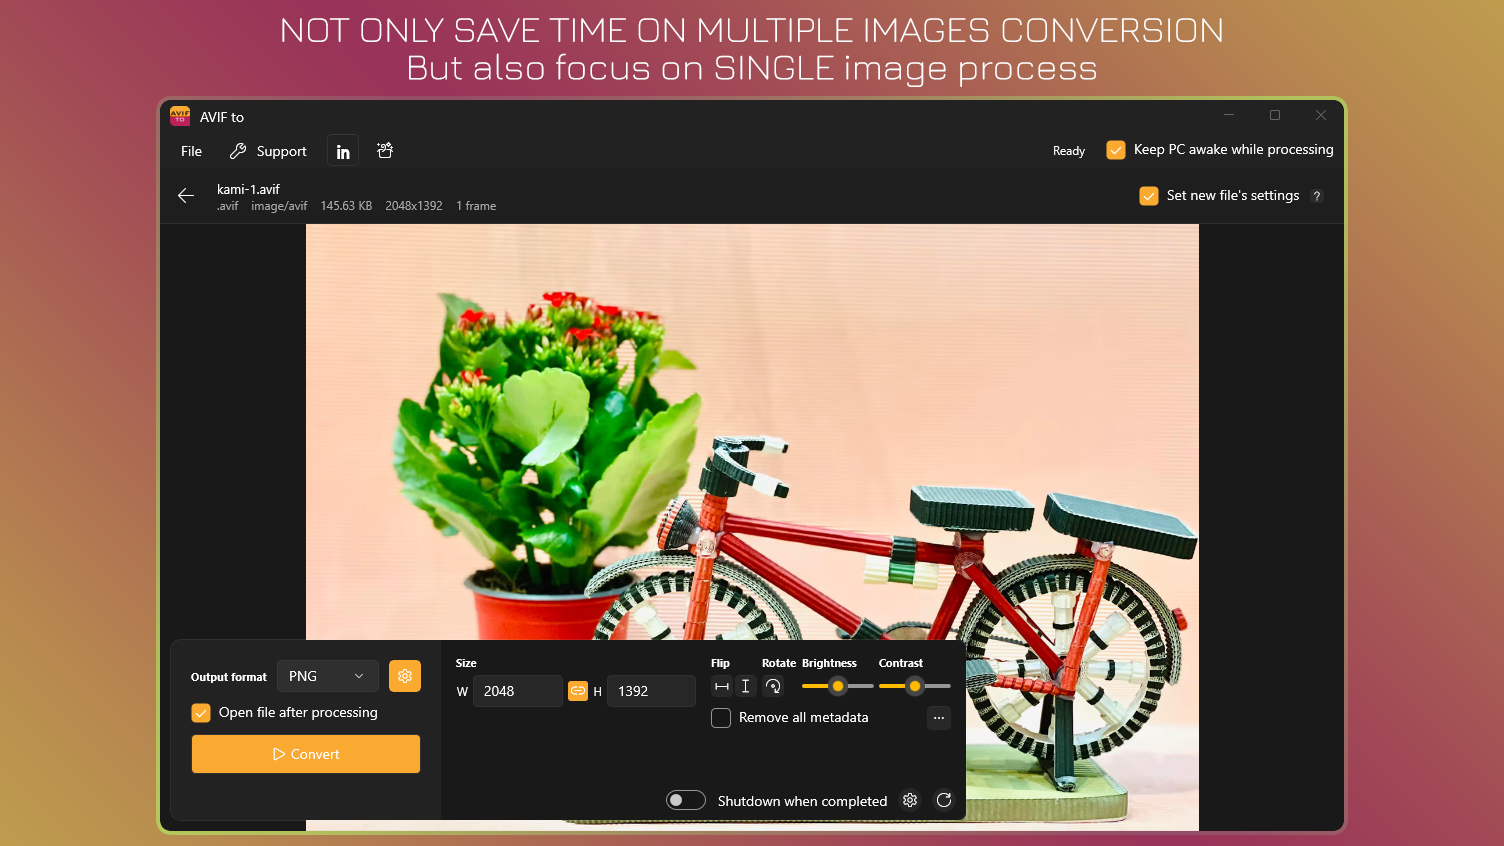 Not Only Save Time in Multiple Images Conversion - But also focus on single process.